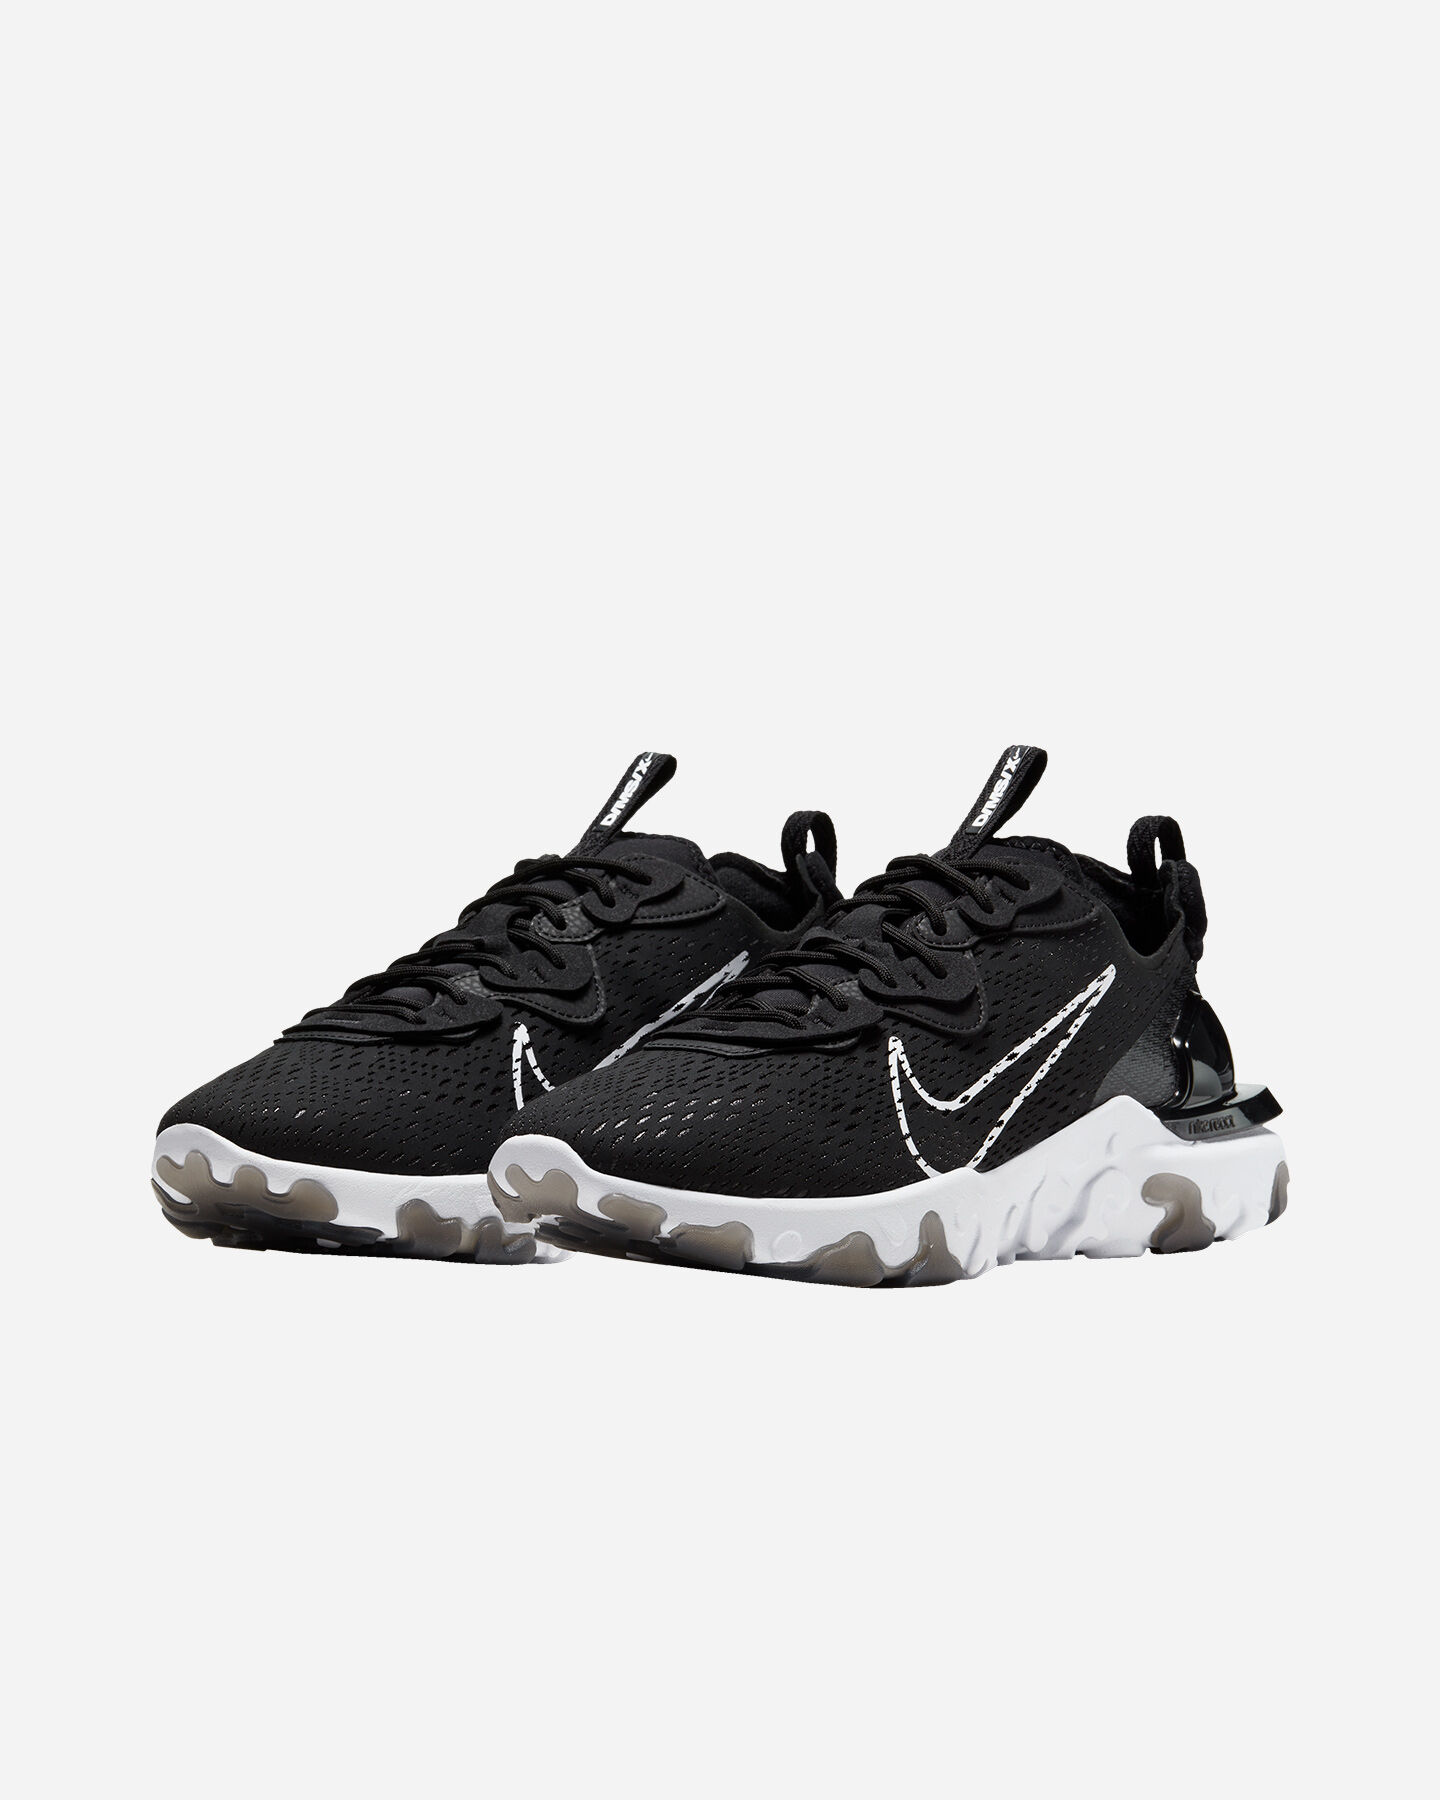  Scarpe sneakers NIKE REACT VISION M S5199847|101|8.5 scatto 1